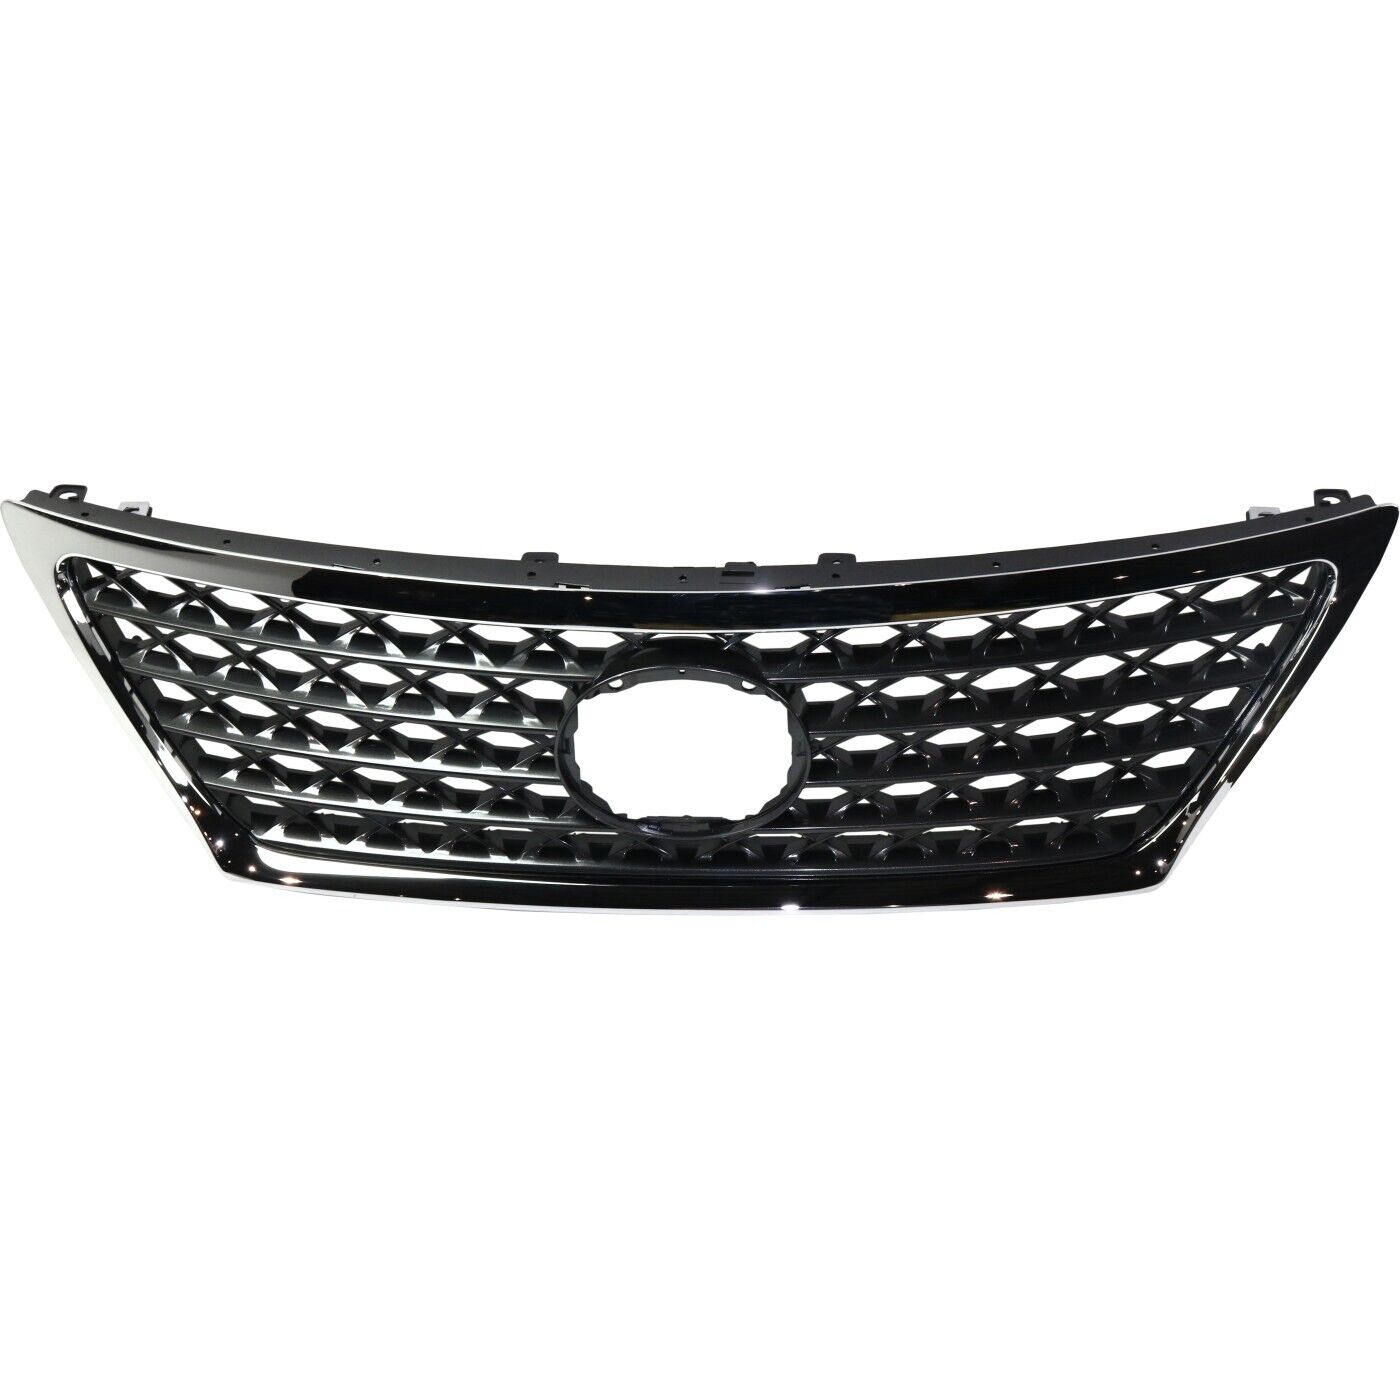 Grille Grill 5310050903 for Lexus LS460 2010-2012